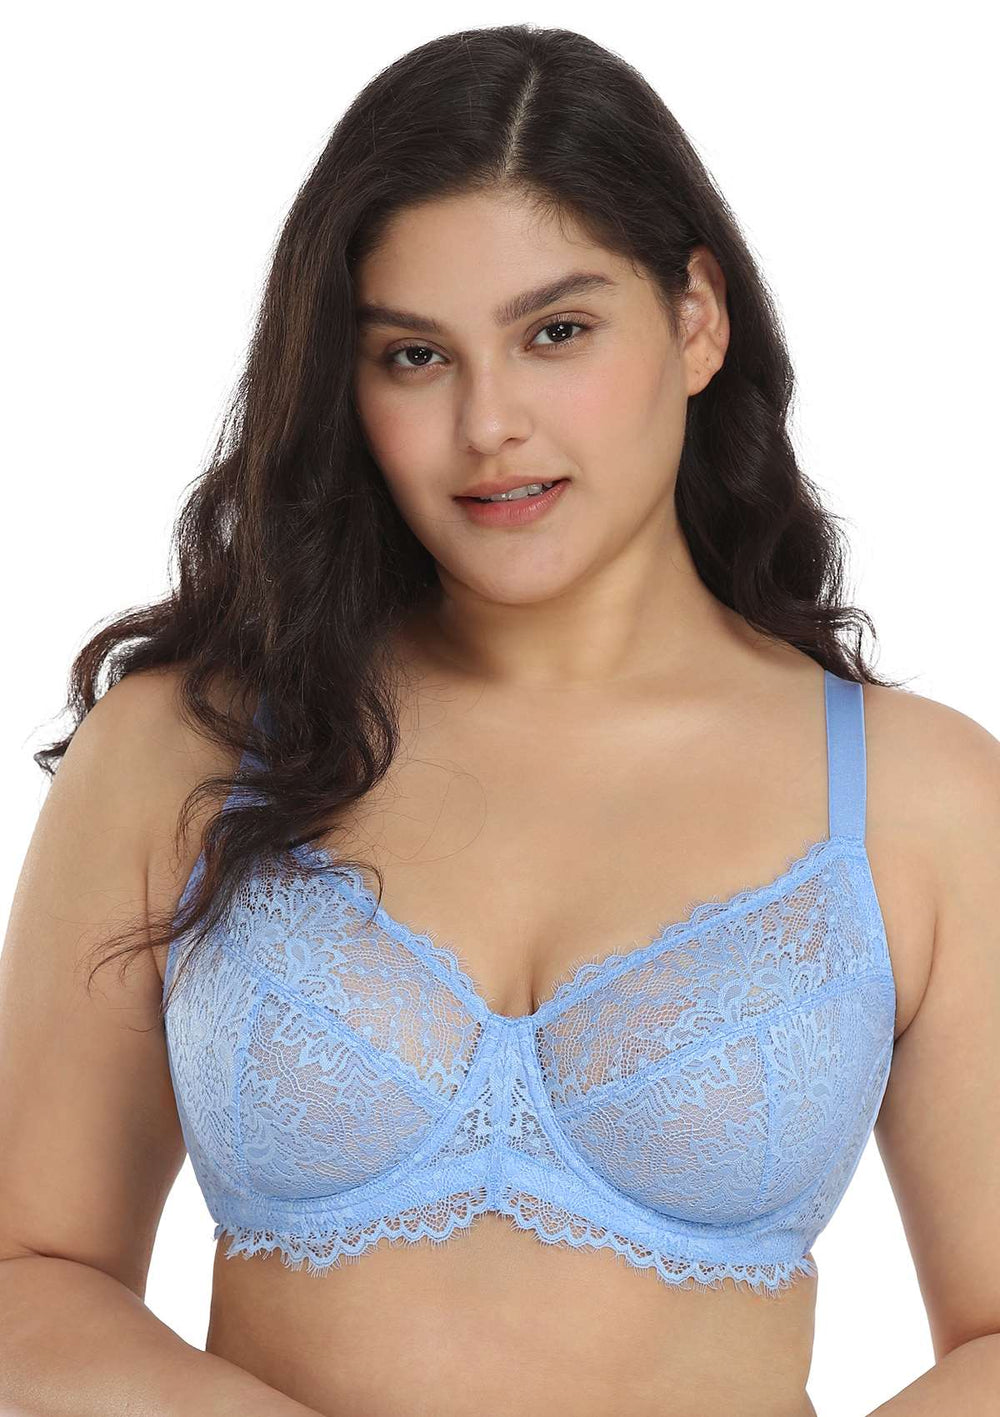 HSIA bras are 🔥🔥🔥 i am so excited for these size inclusive companie